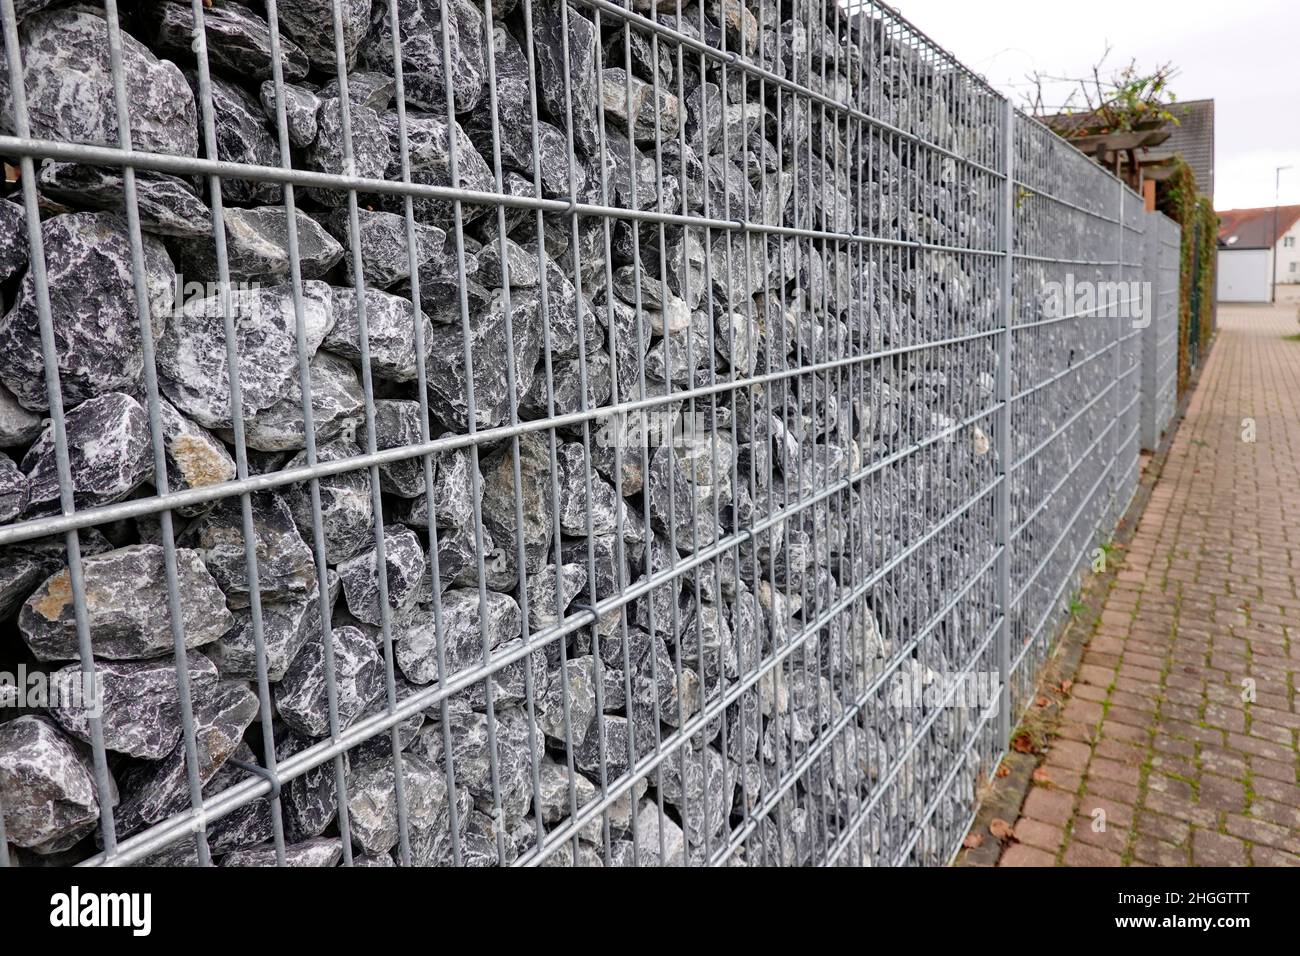 ecologically questionable garden fence made of gravel stones in a wire cage, gabion wall, Germany Stock Photo